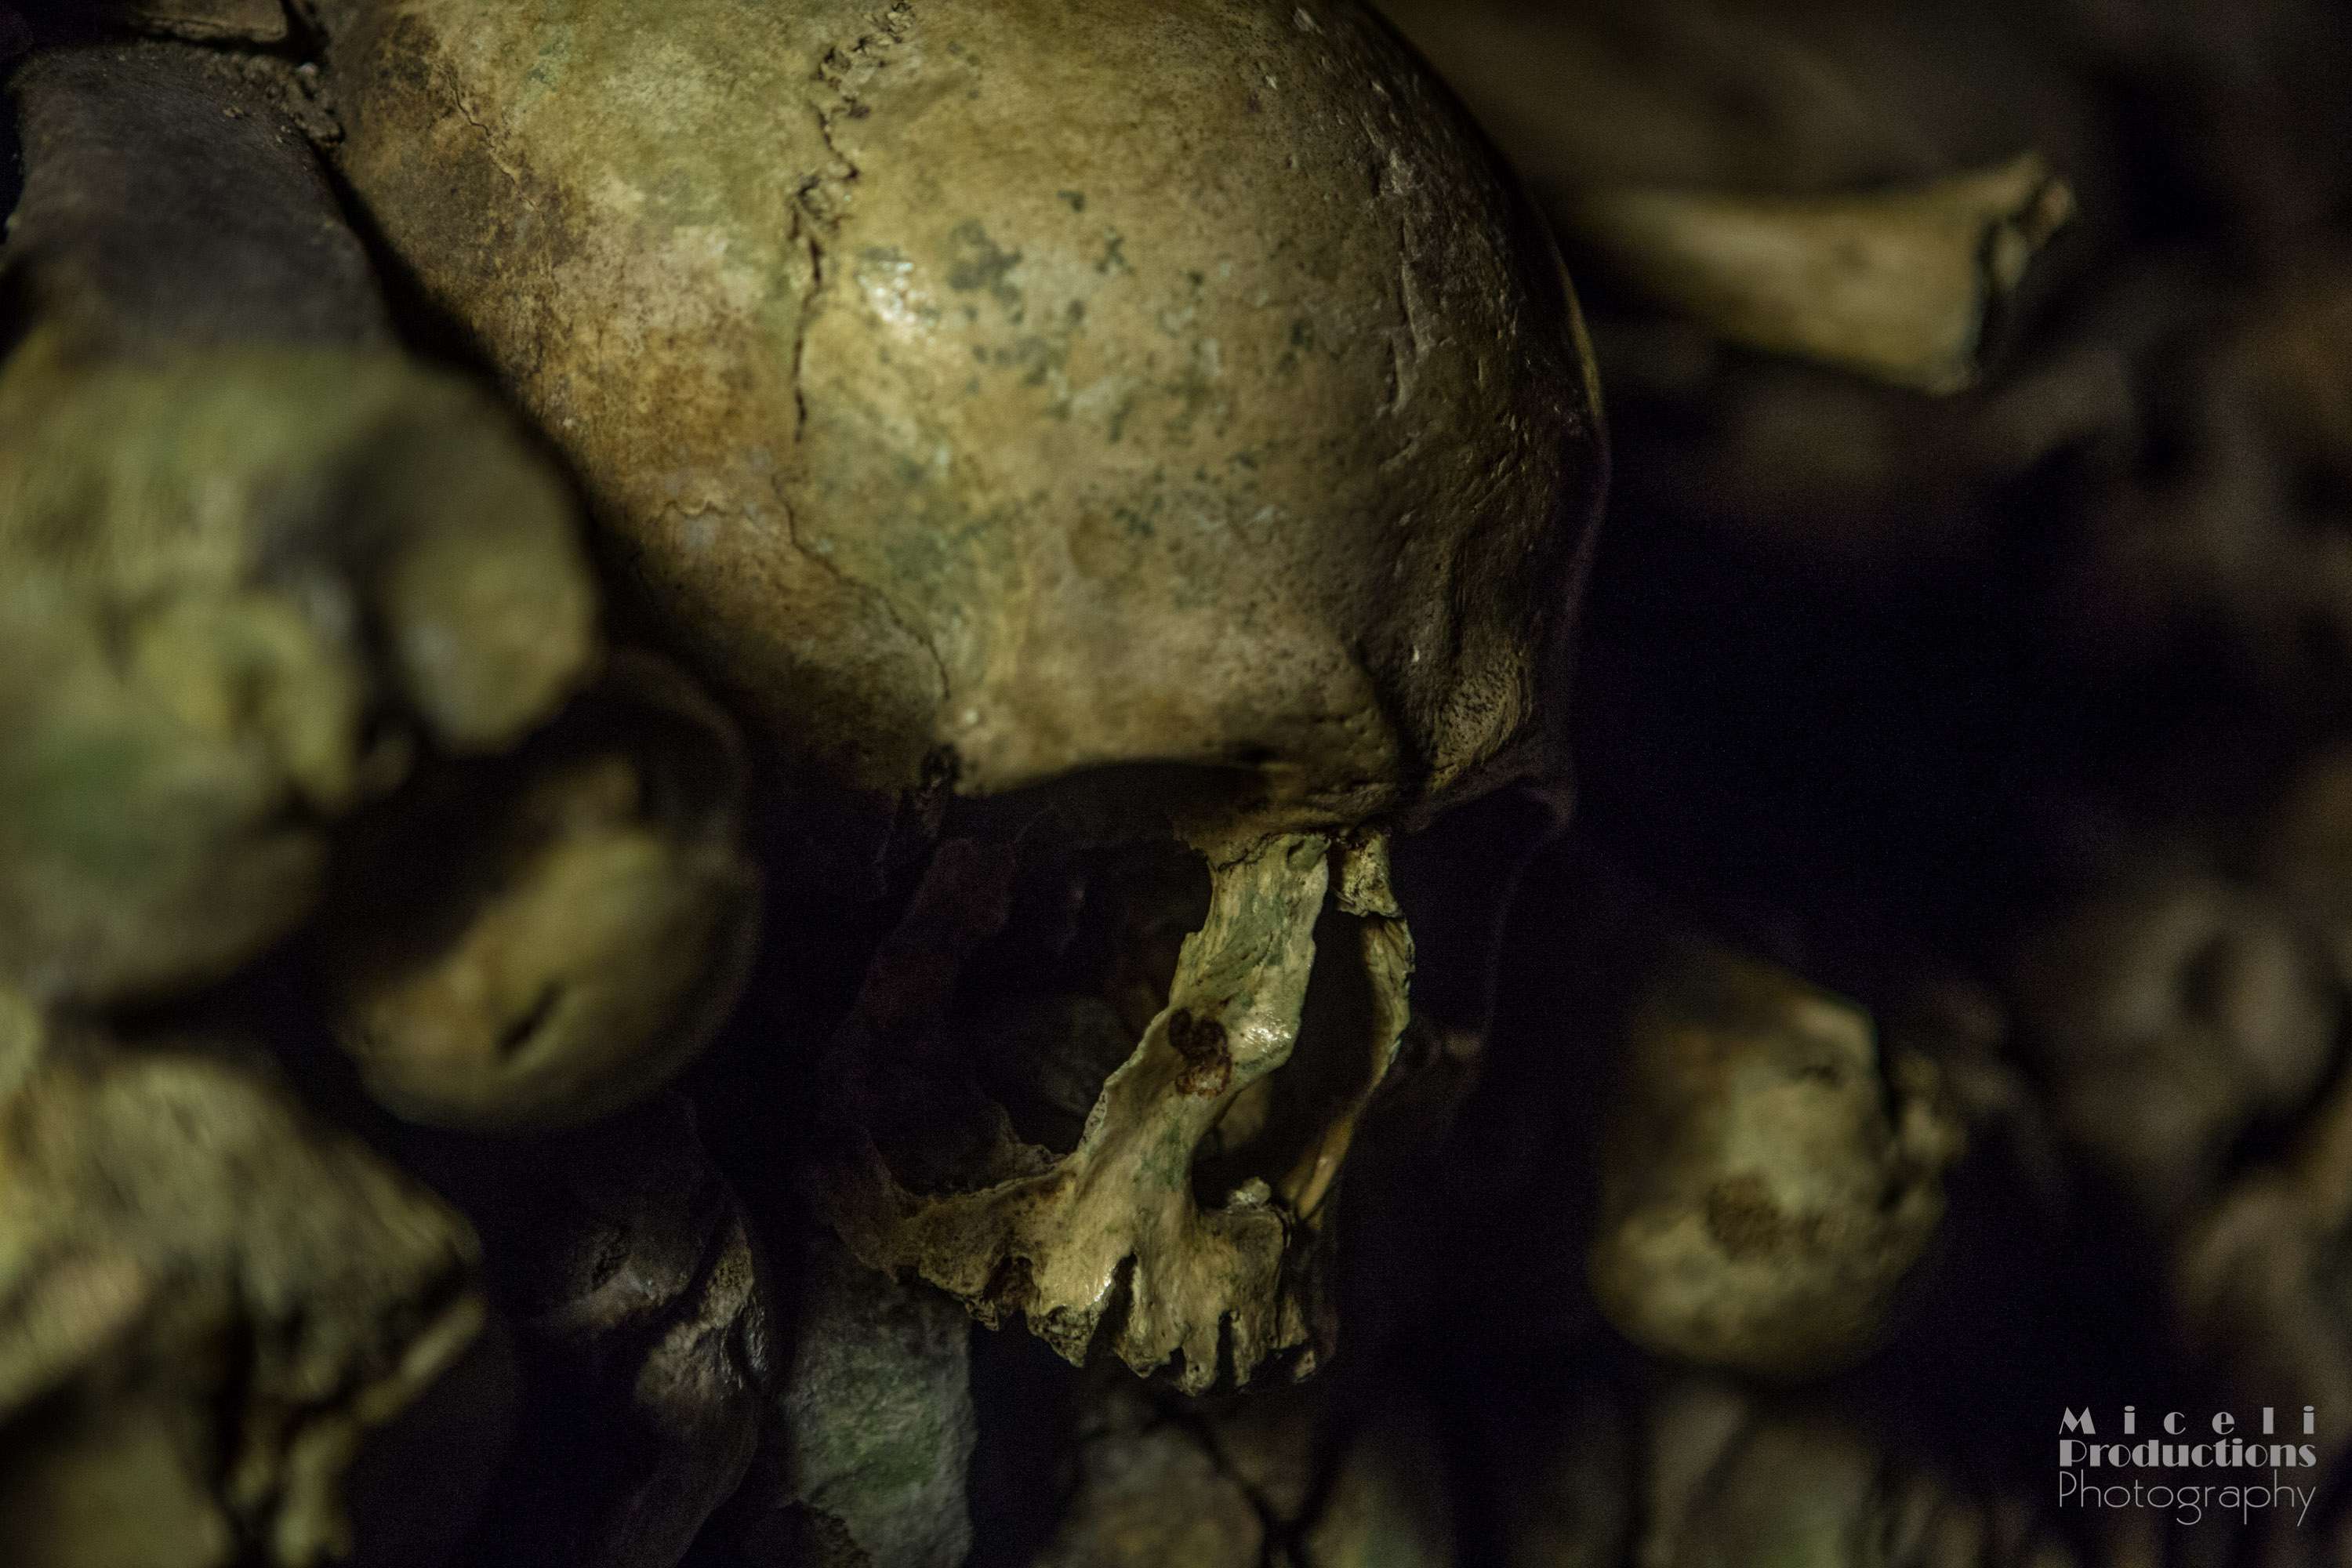 A close up image of a skull in The Catacombs of Paris.